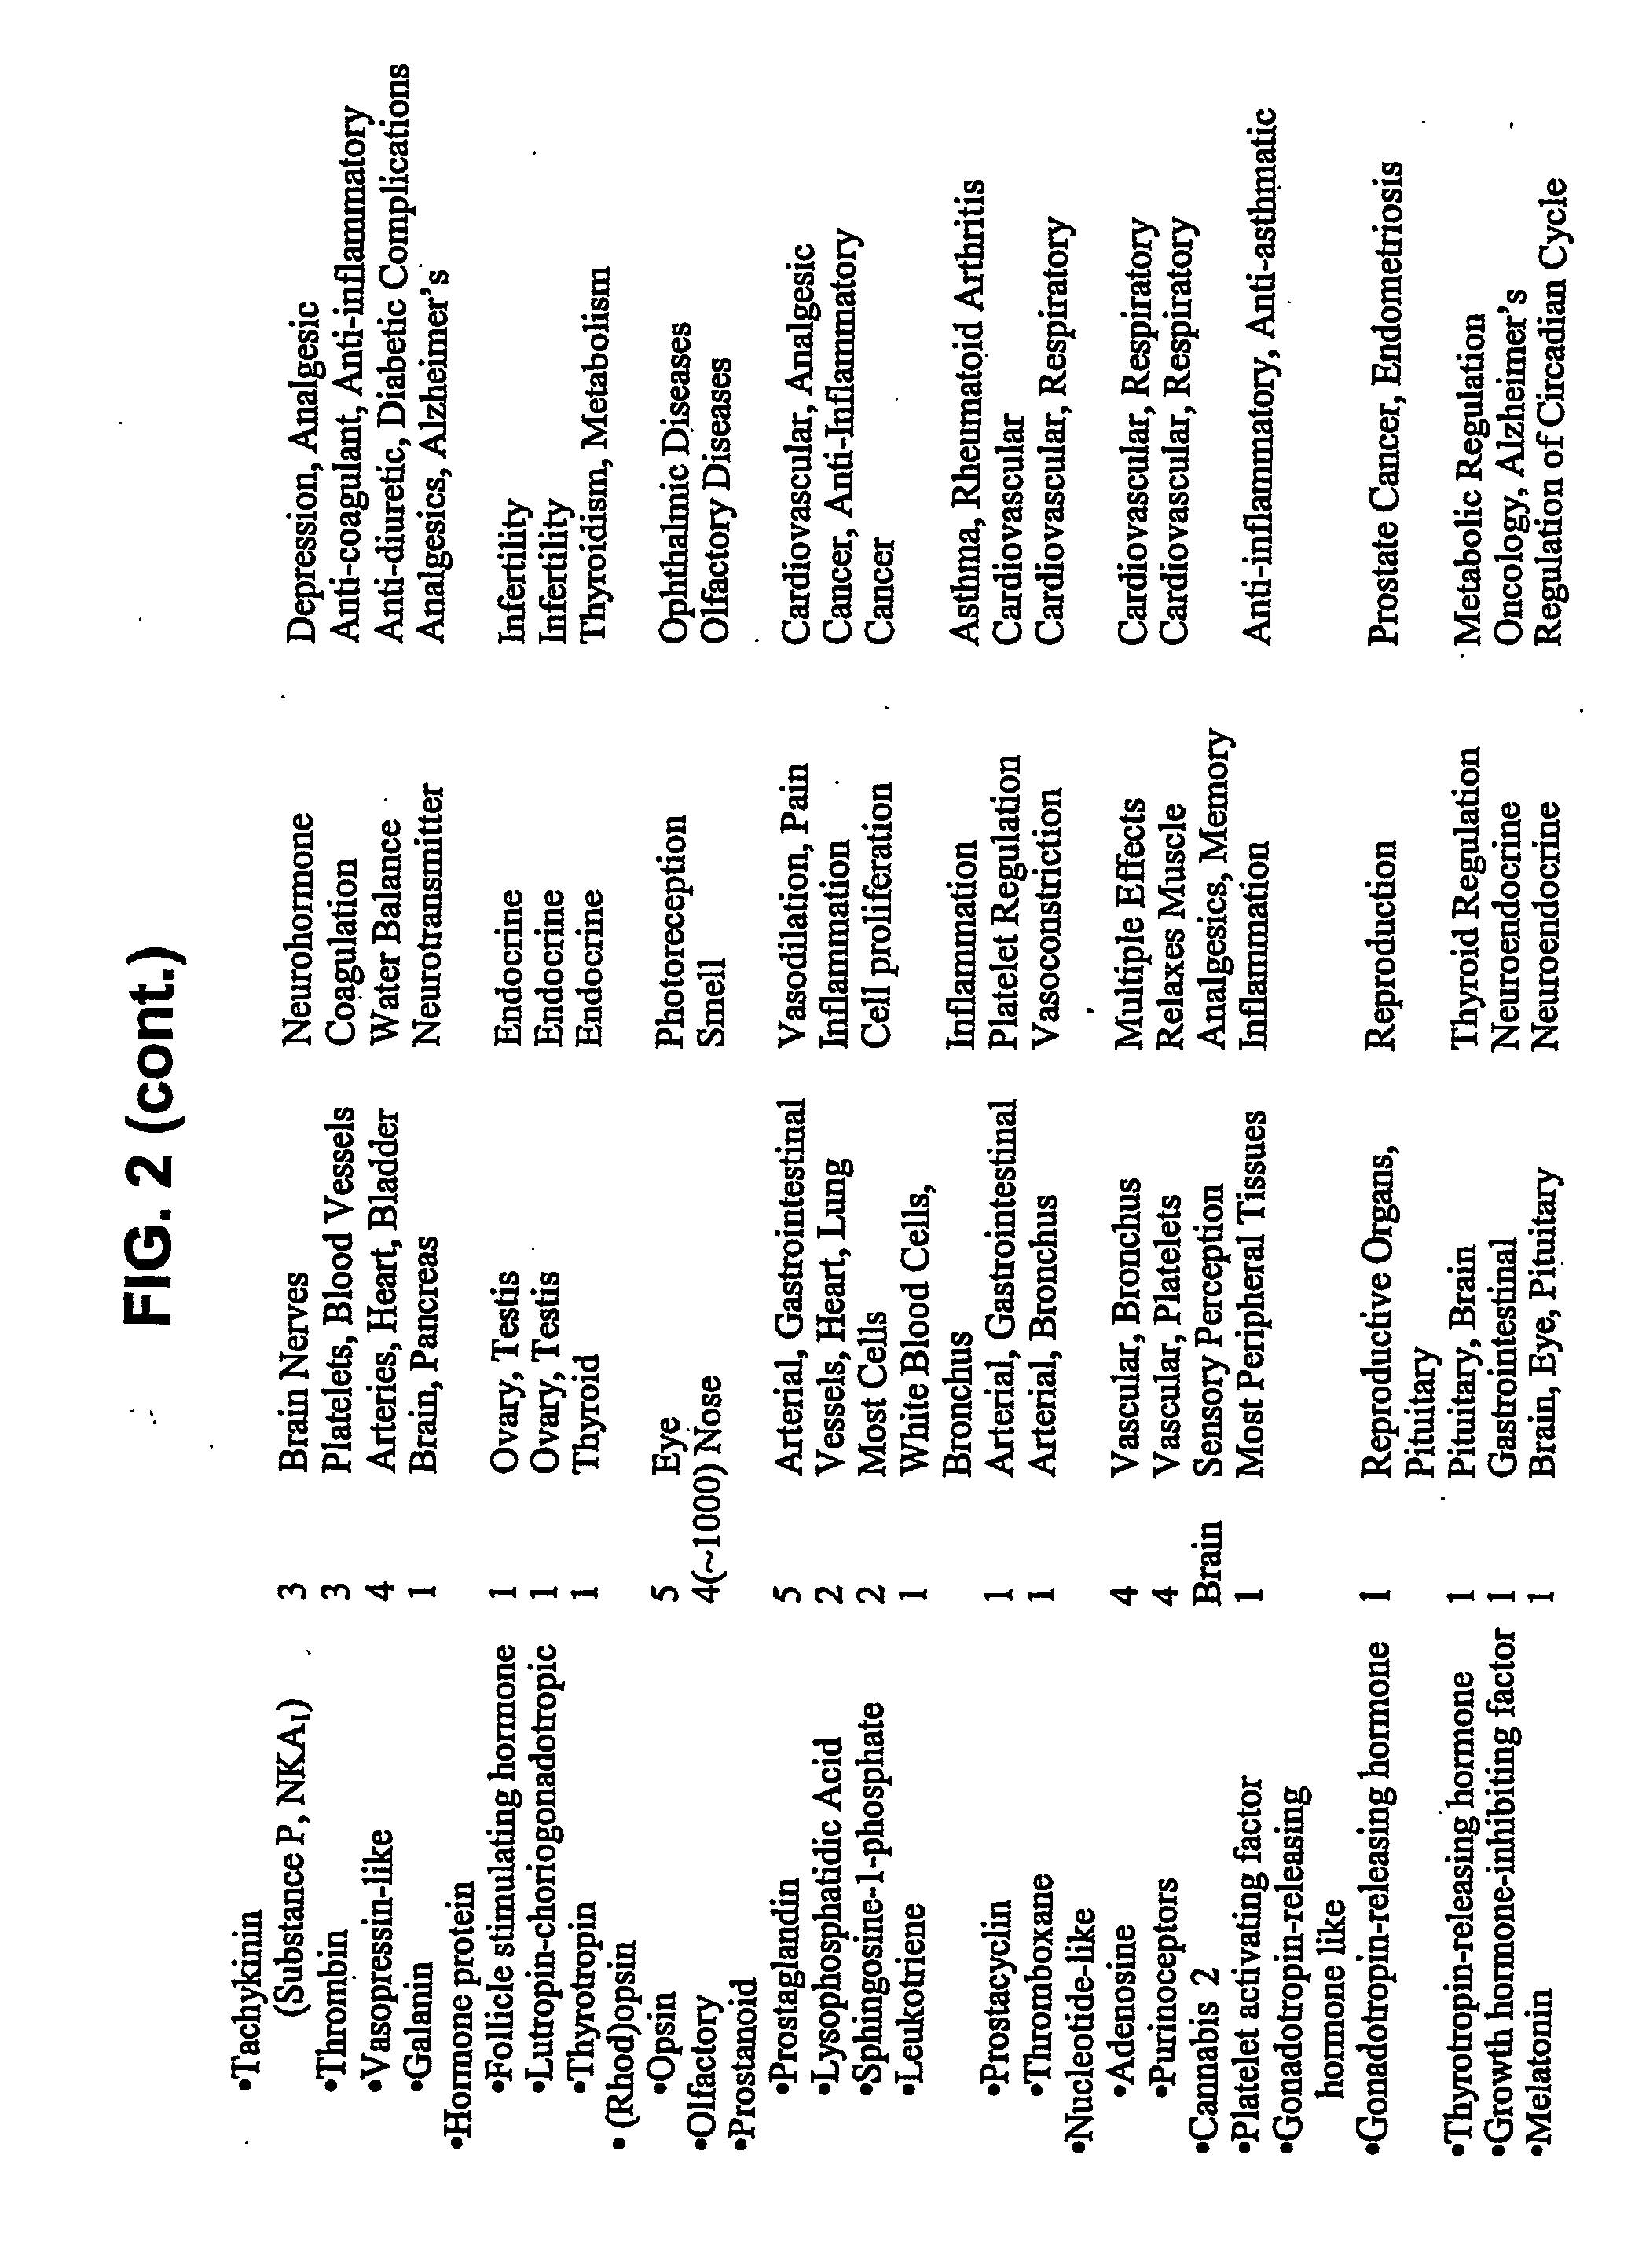 Methods Of Screening Compositions For G Protein-Coupled Receptors Aganist Agonists